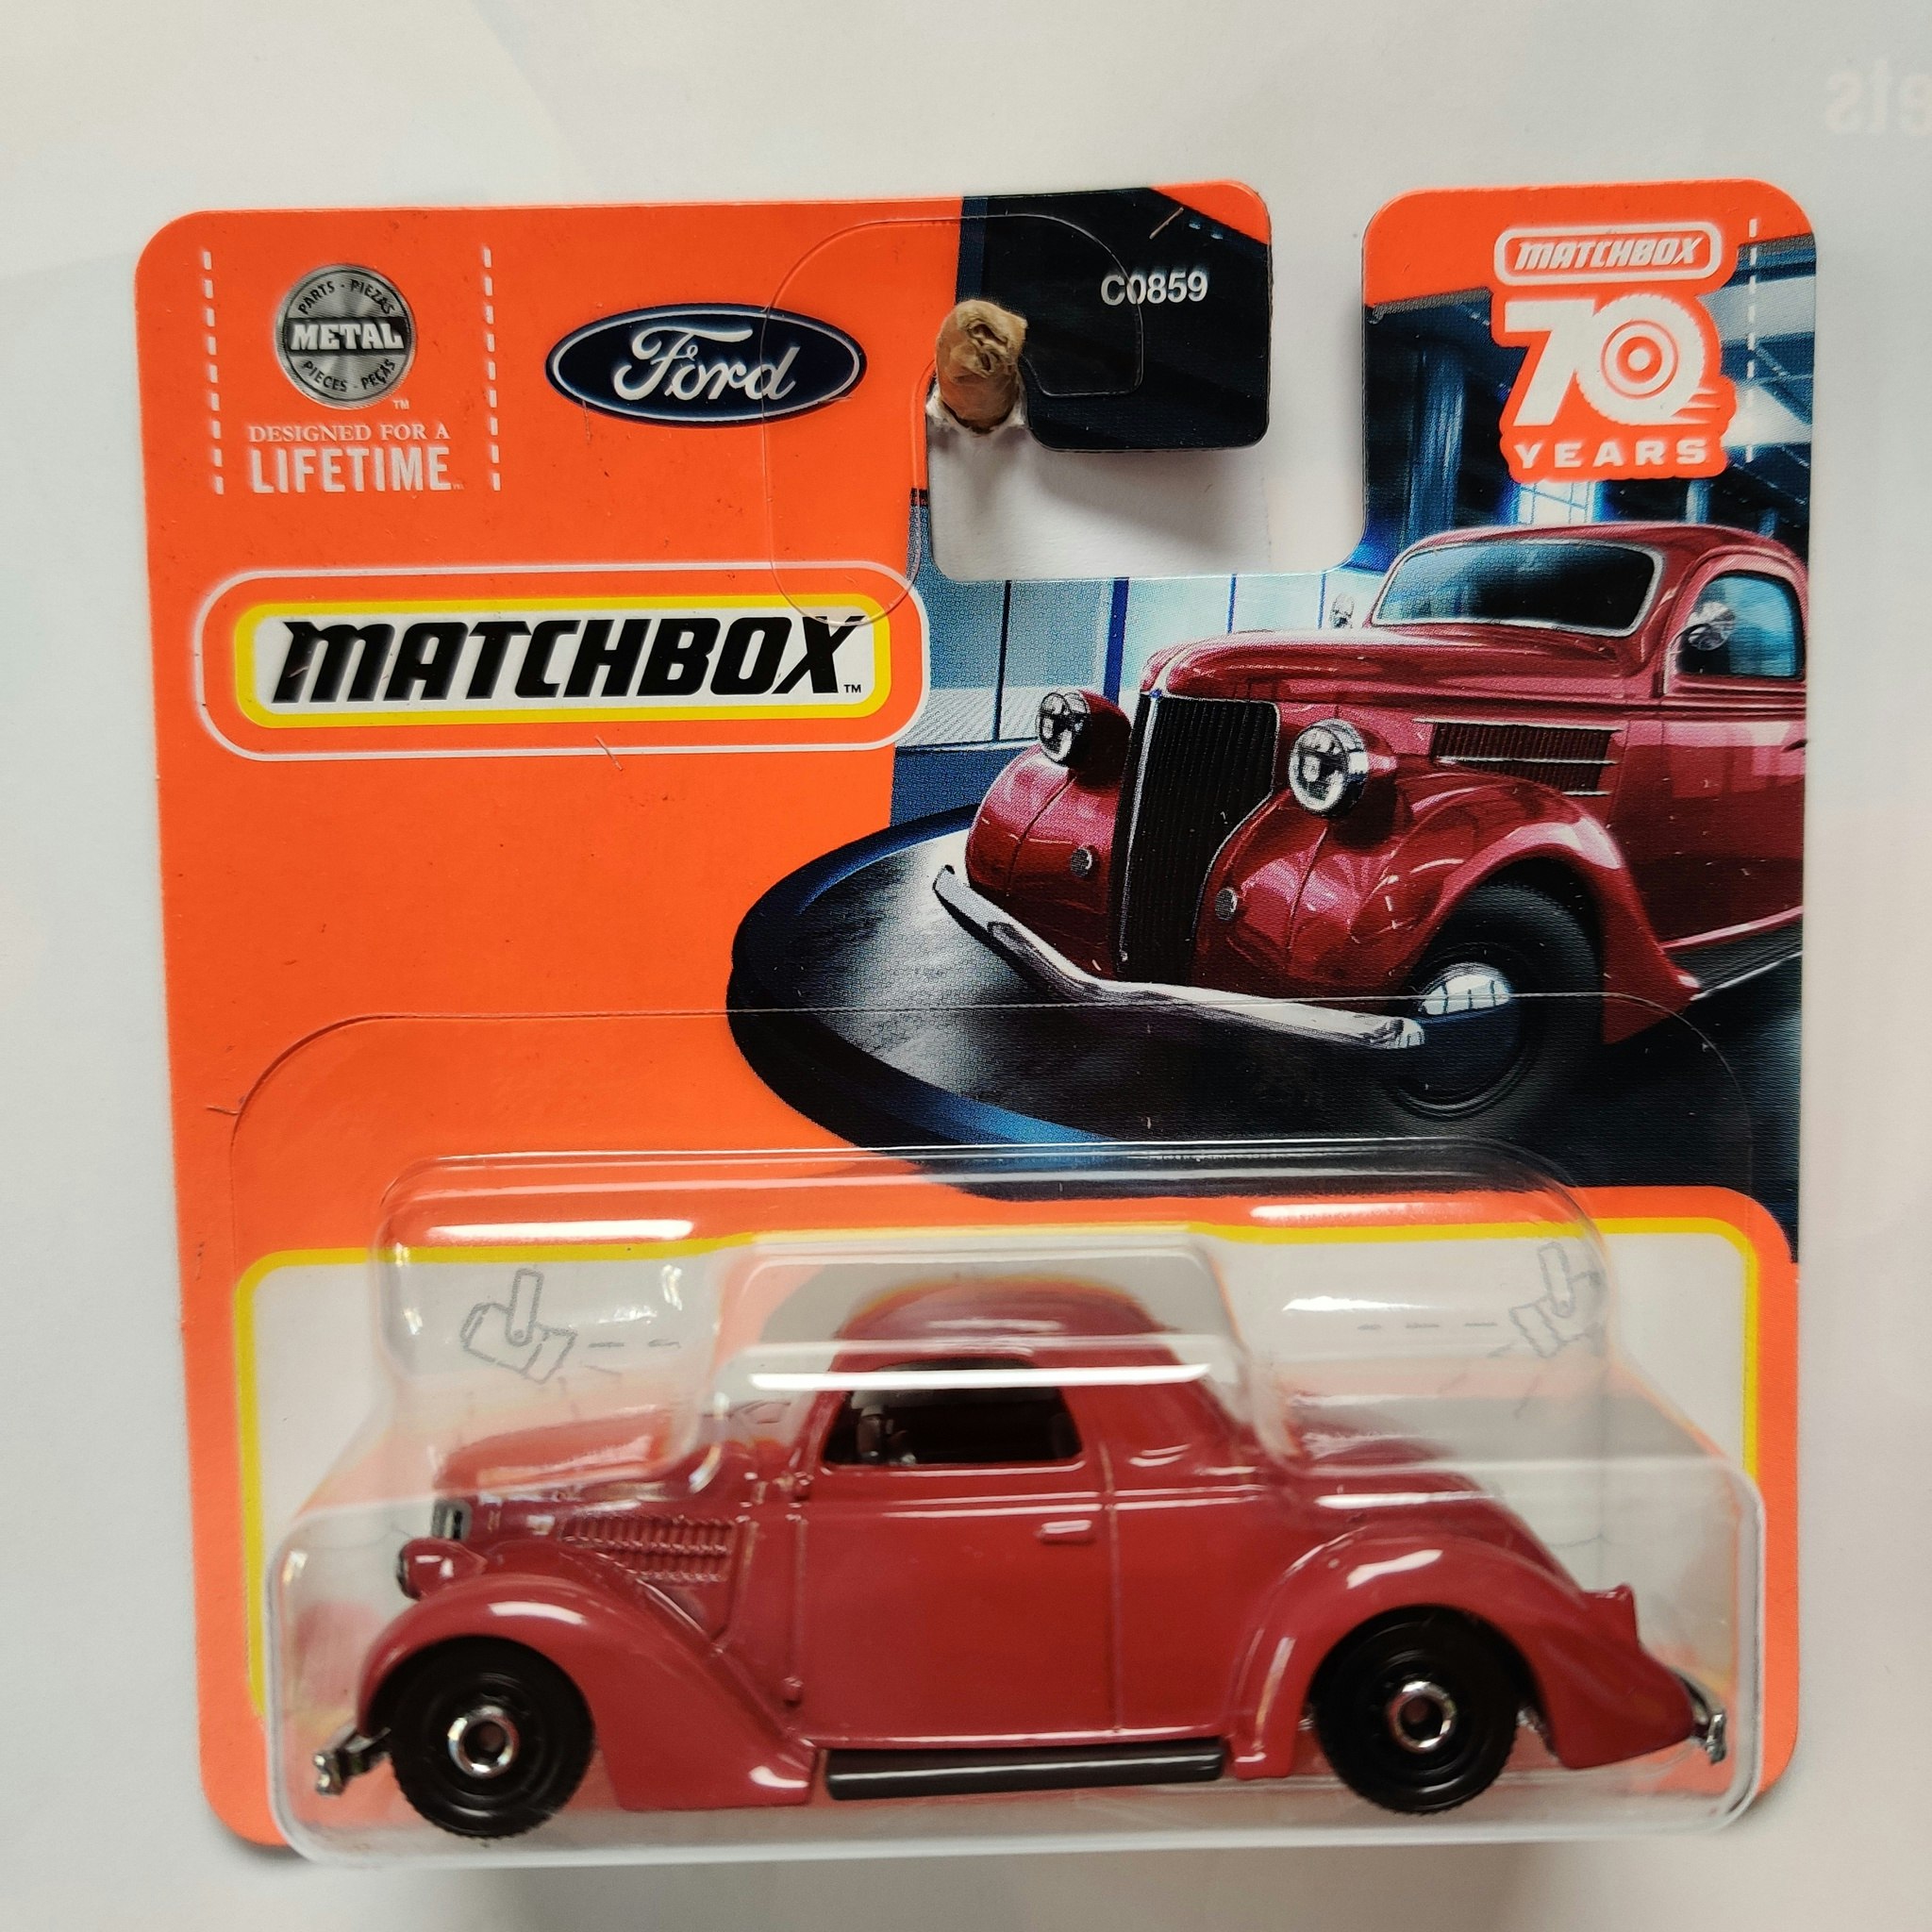 Skala 1/64 Matchbox 70 years - Ford Coupe 1936